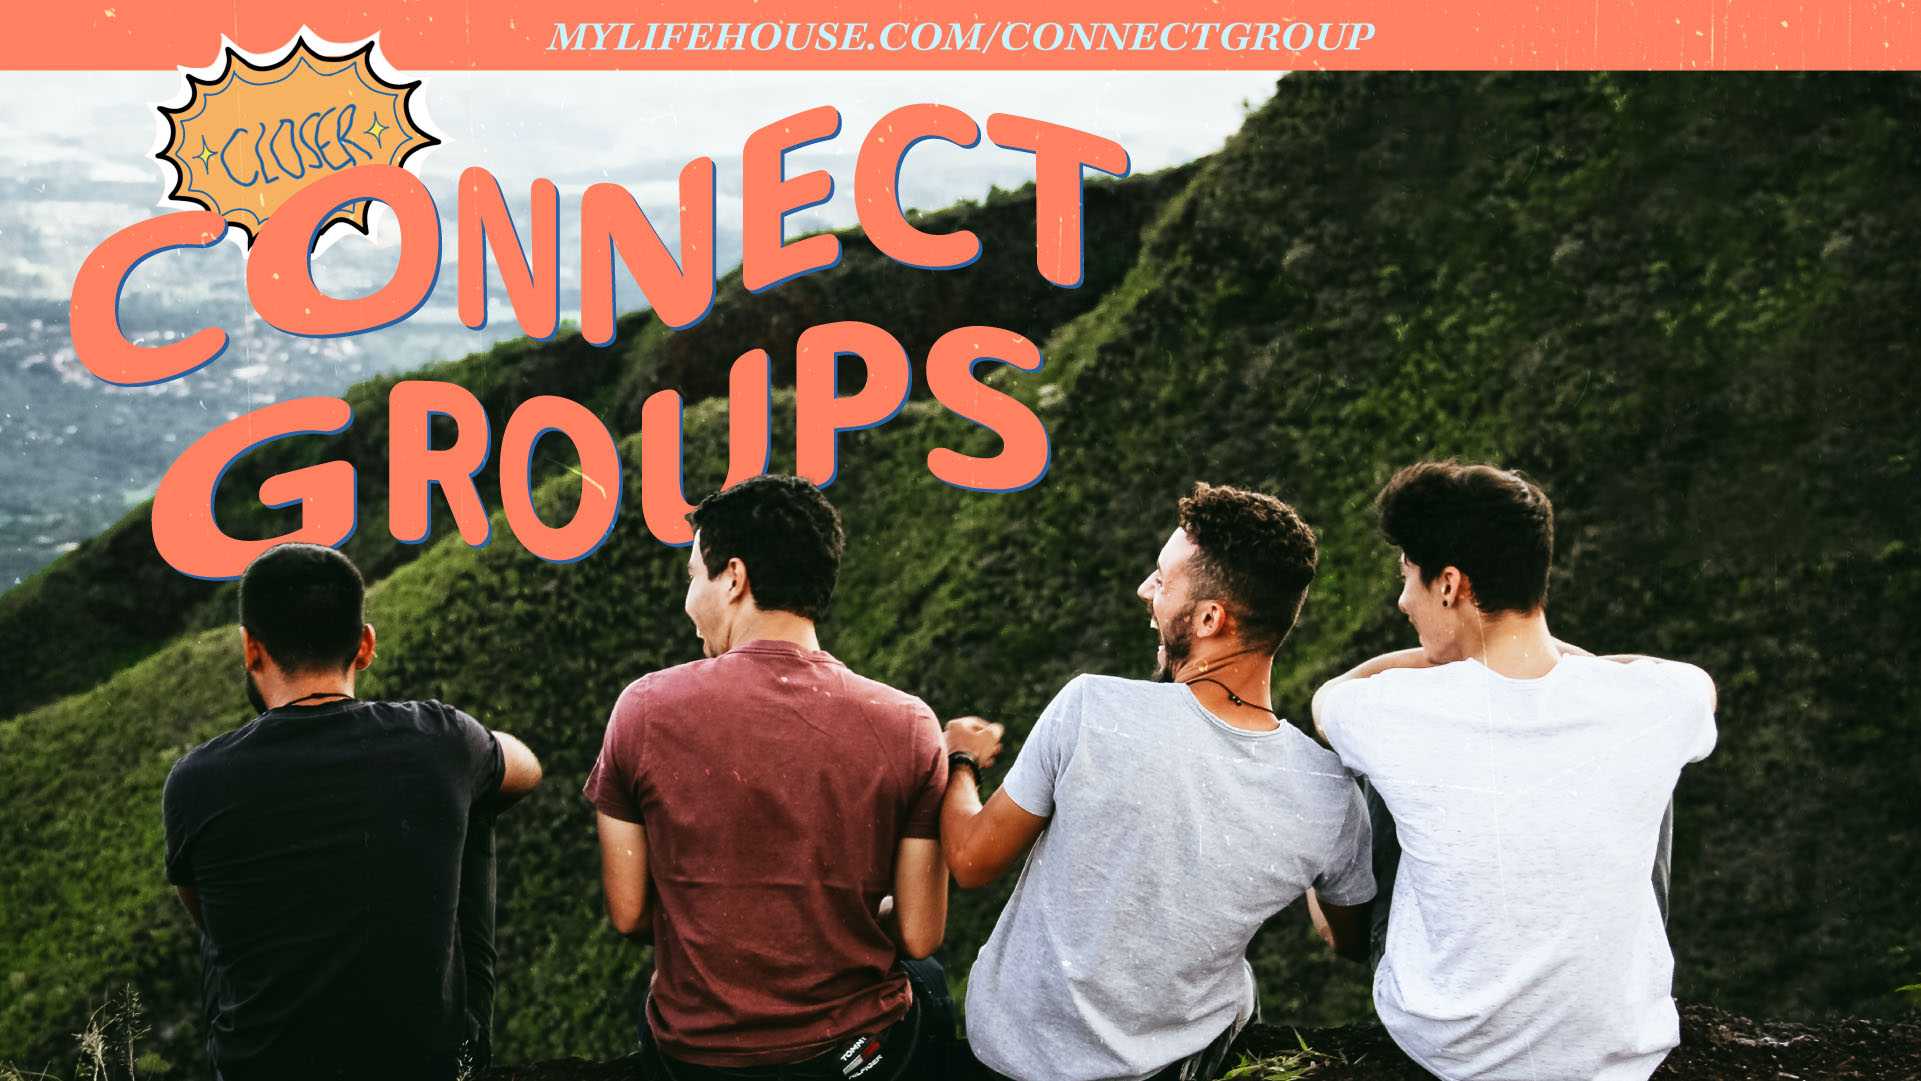 Connect groups